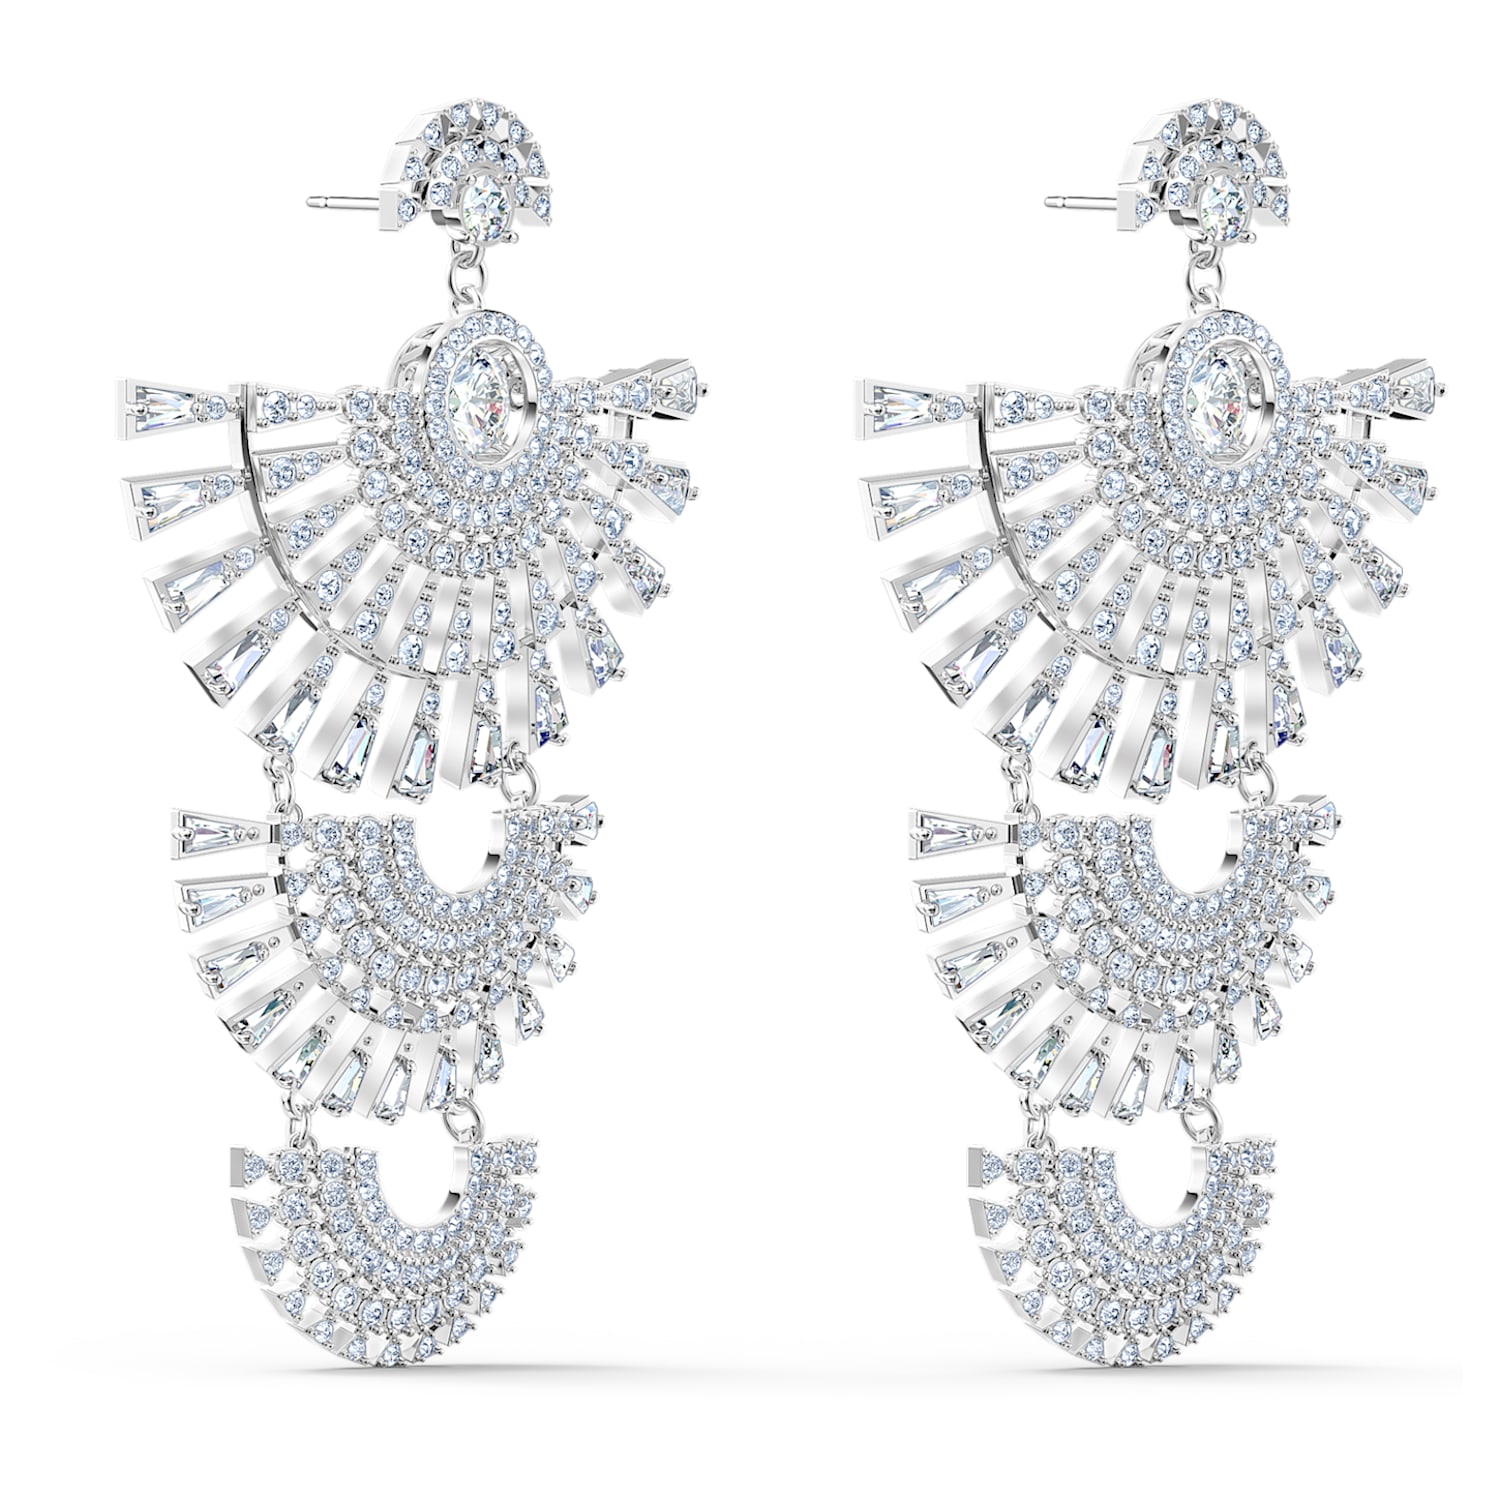 Swarovski Sparkling Dance Dial Up earrings, Large, White, Rhodium plated